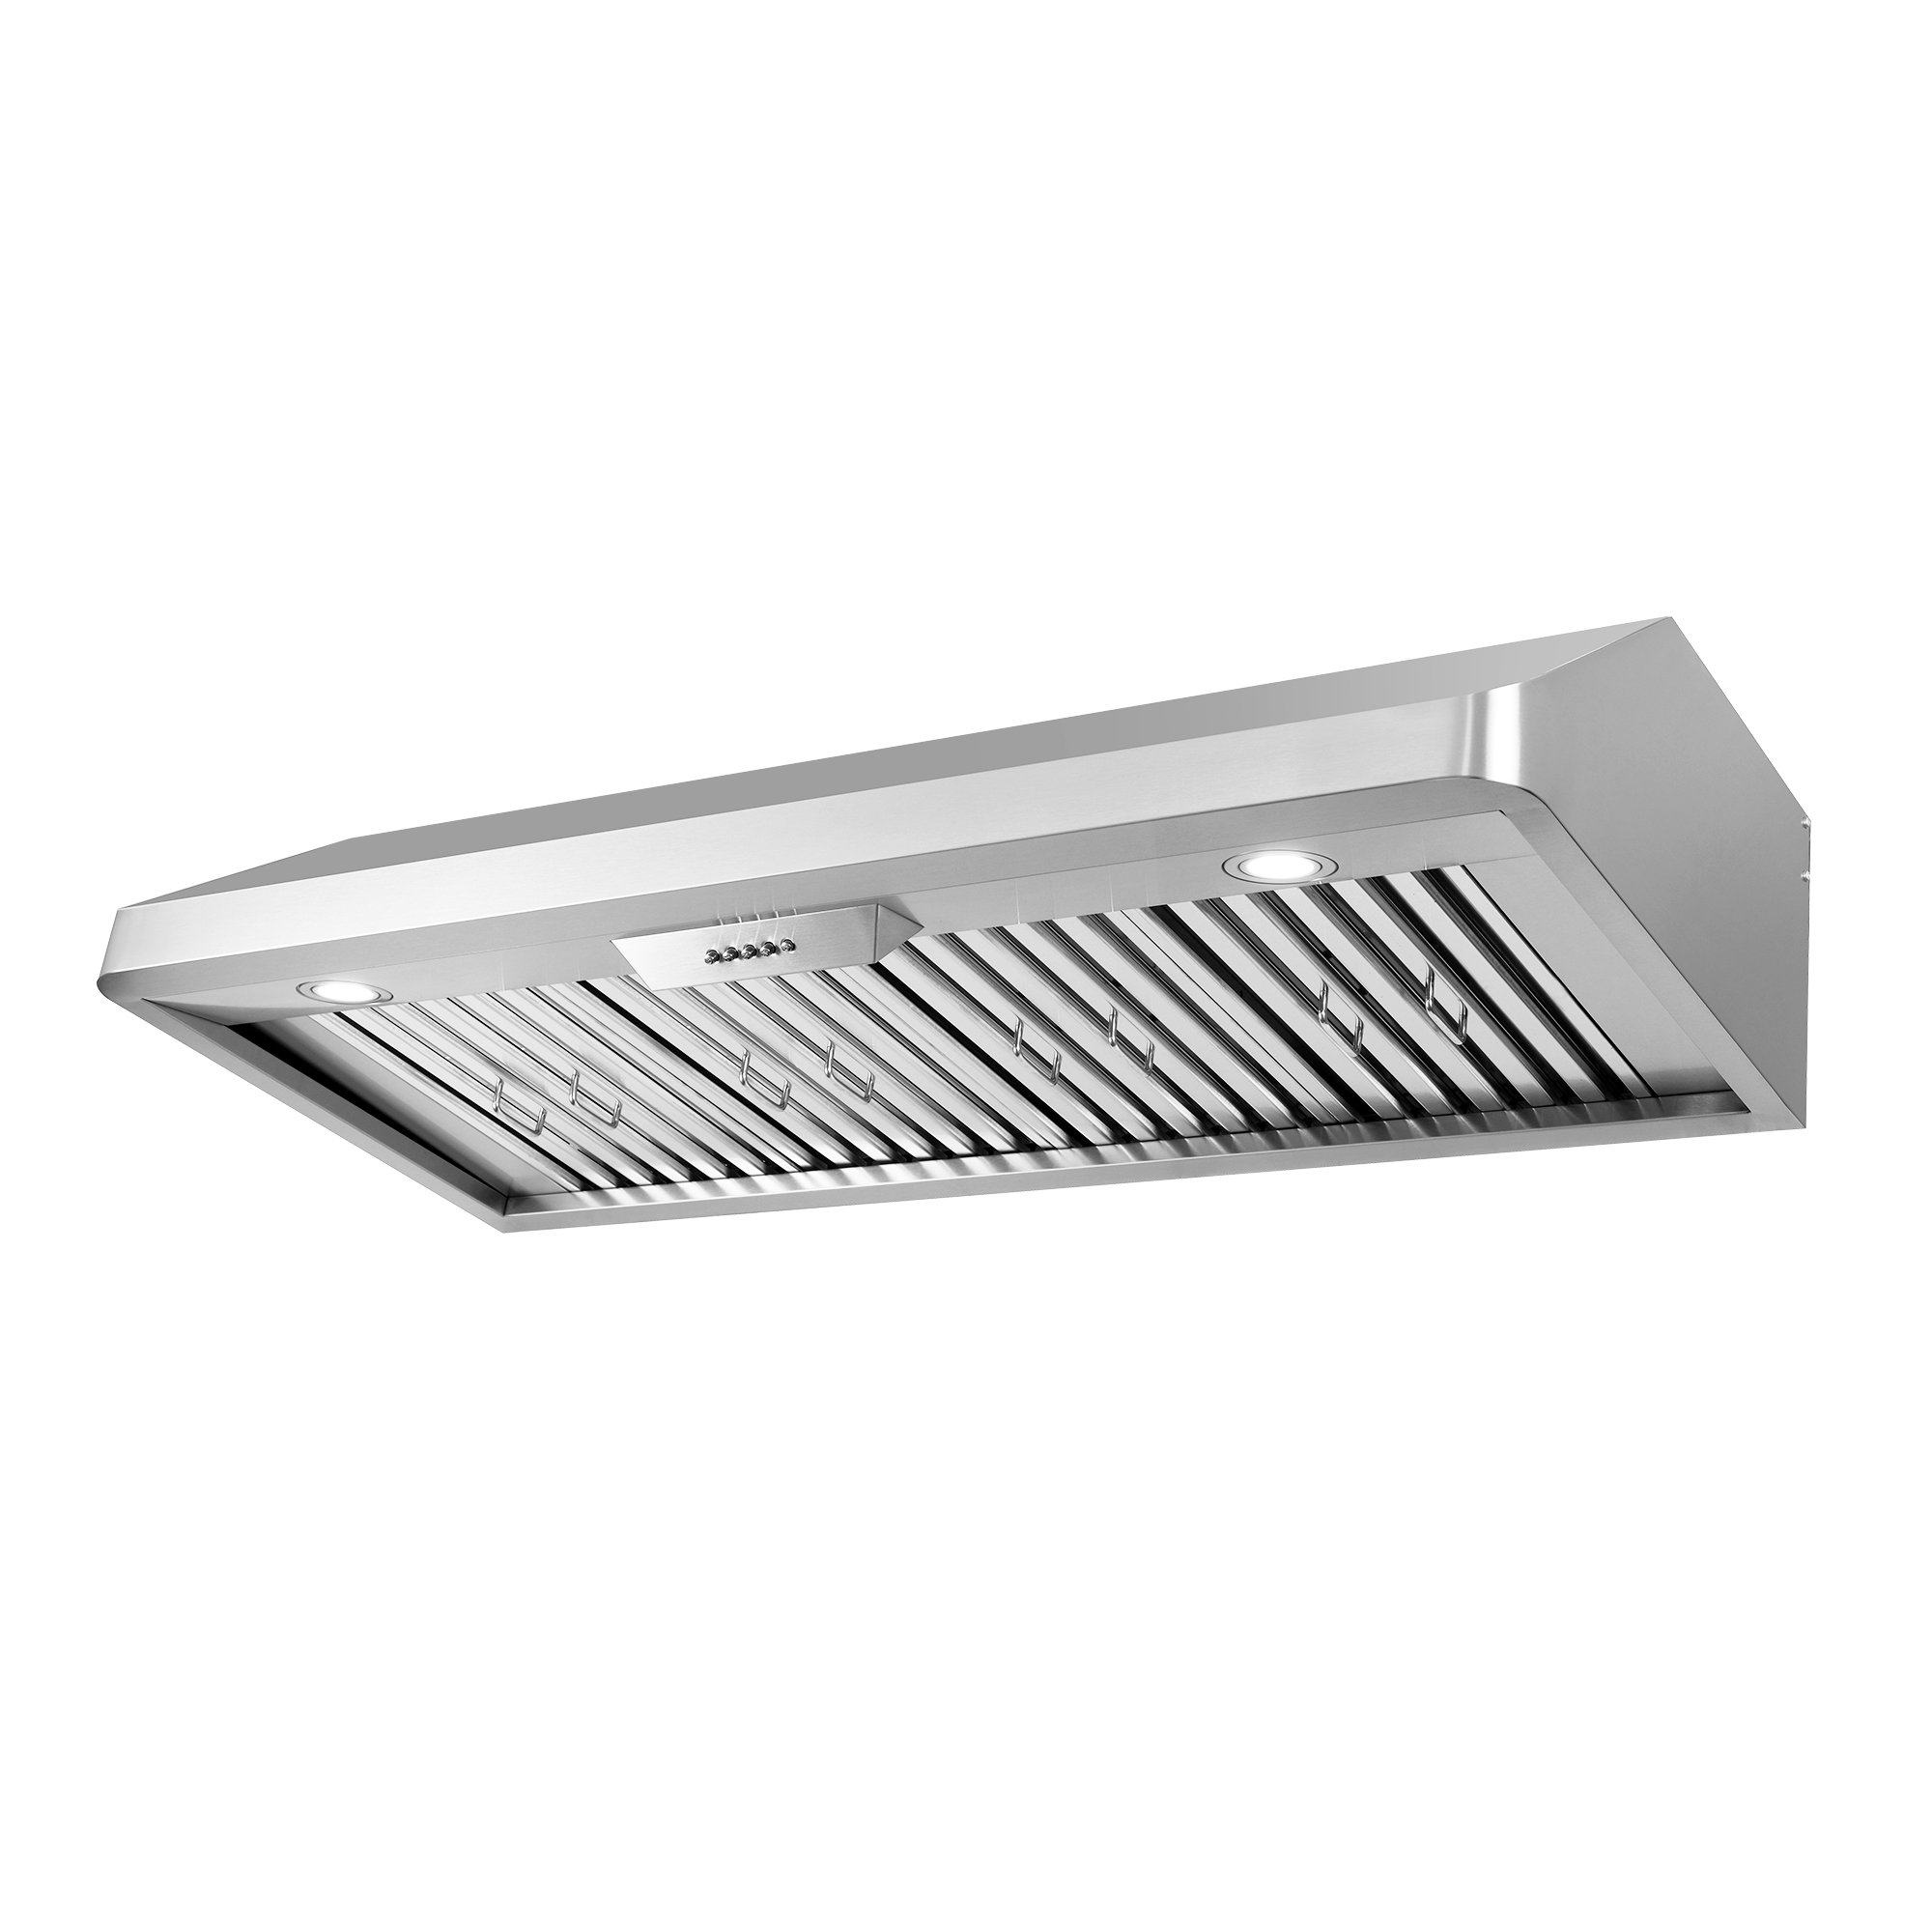 Cosmo 63175 Series 30 380 Cubic Feet Per Minute Ductless Wall Mount Range  Hood with Charcoal Filter and Light Included & Reviews